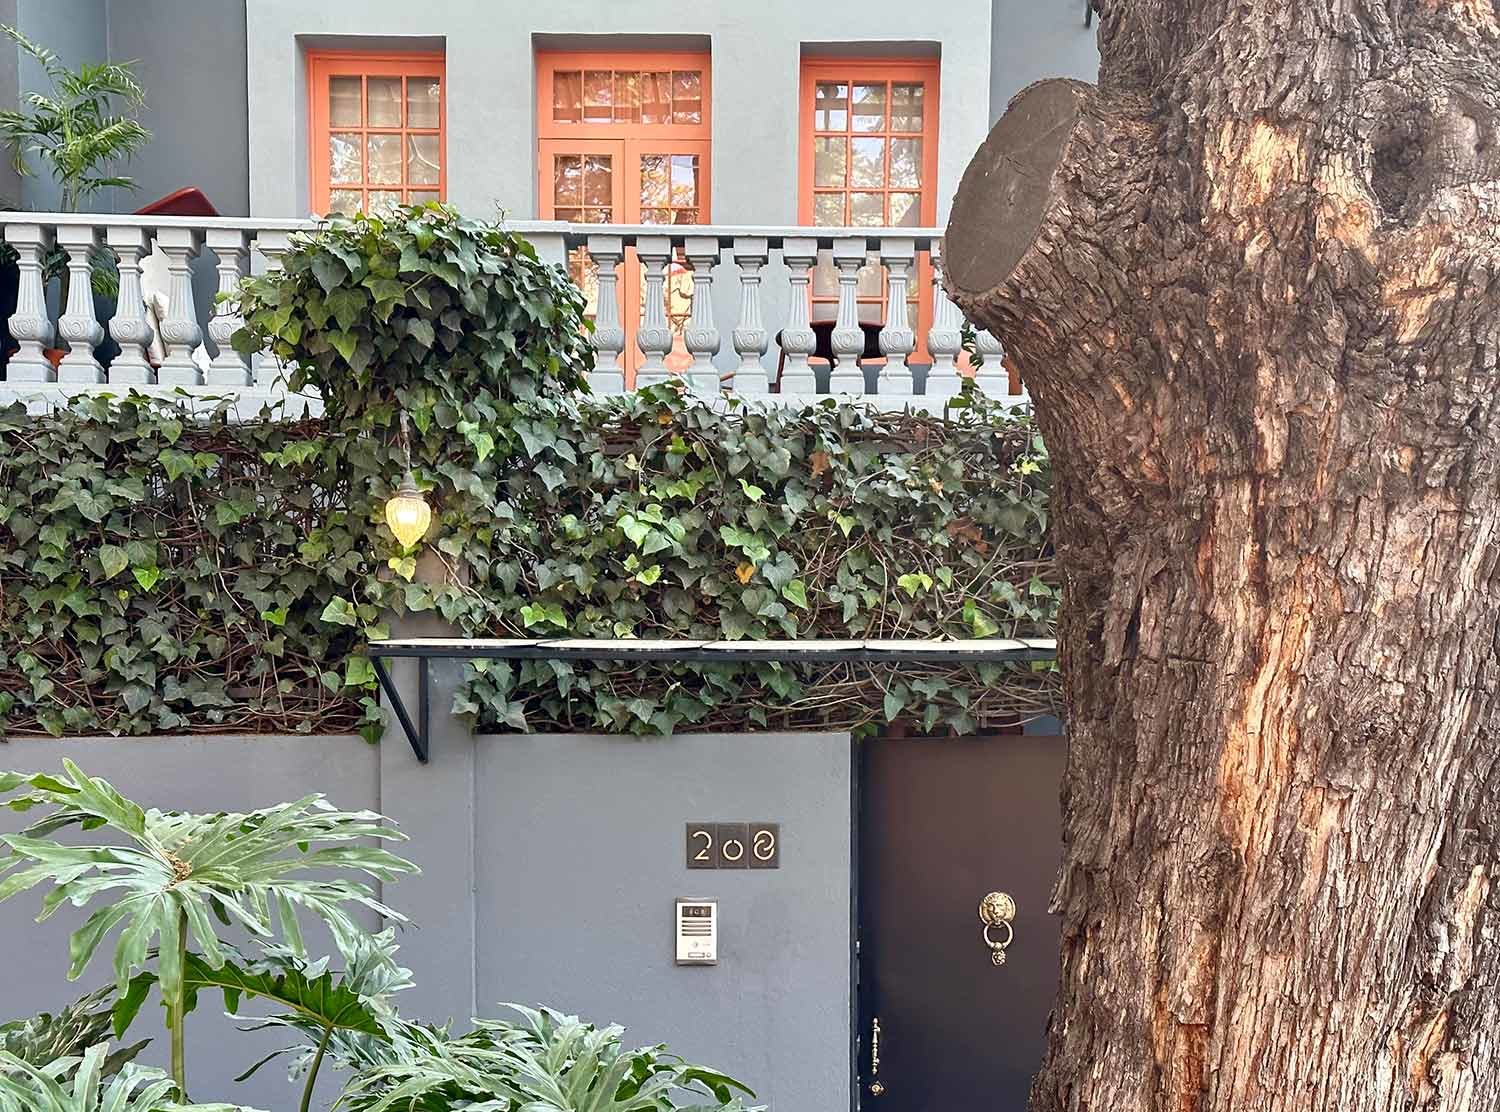 Ignacia Guest House Jalapa 208, your home-away-from-home in CDMX 